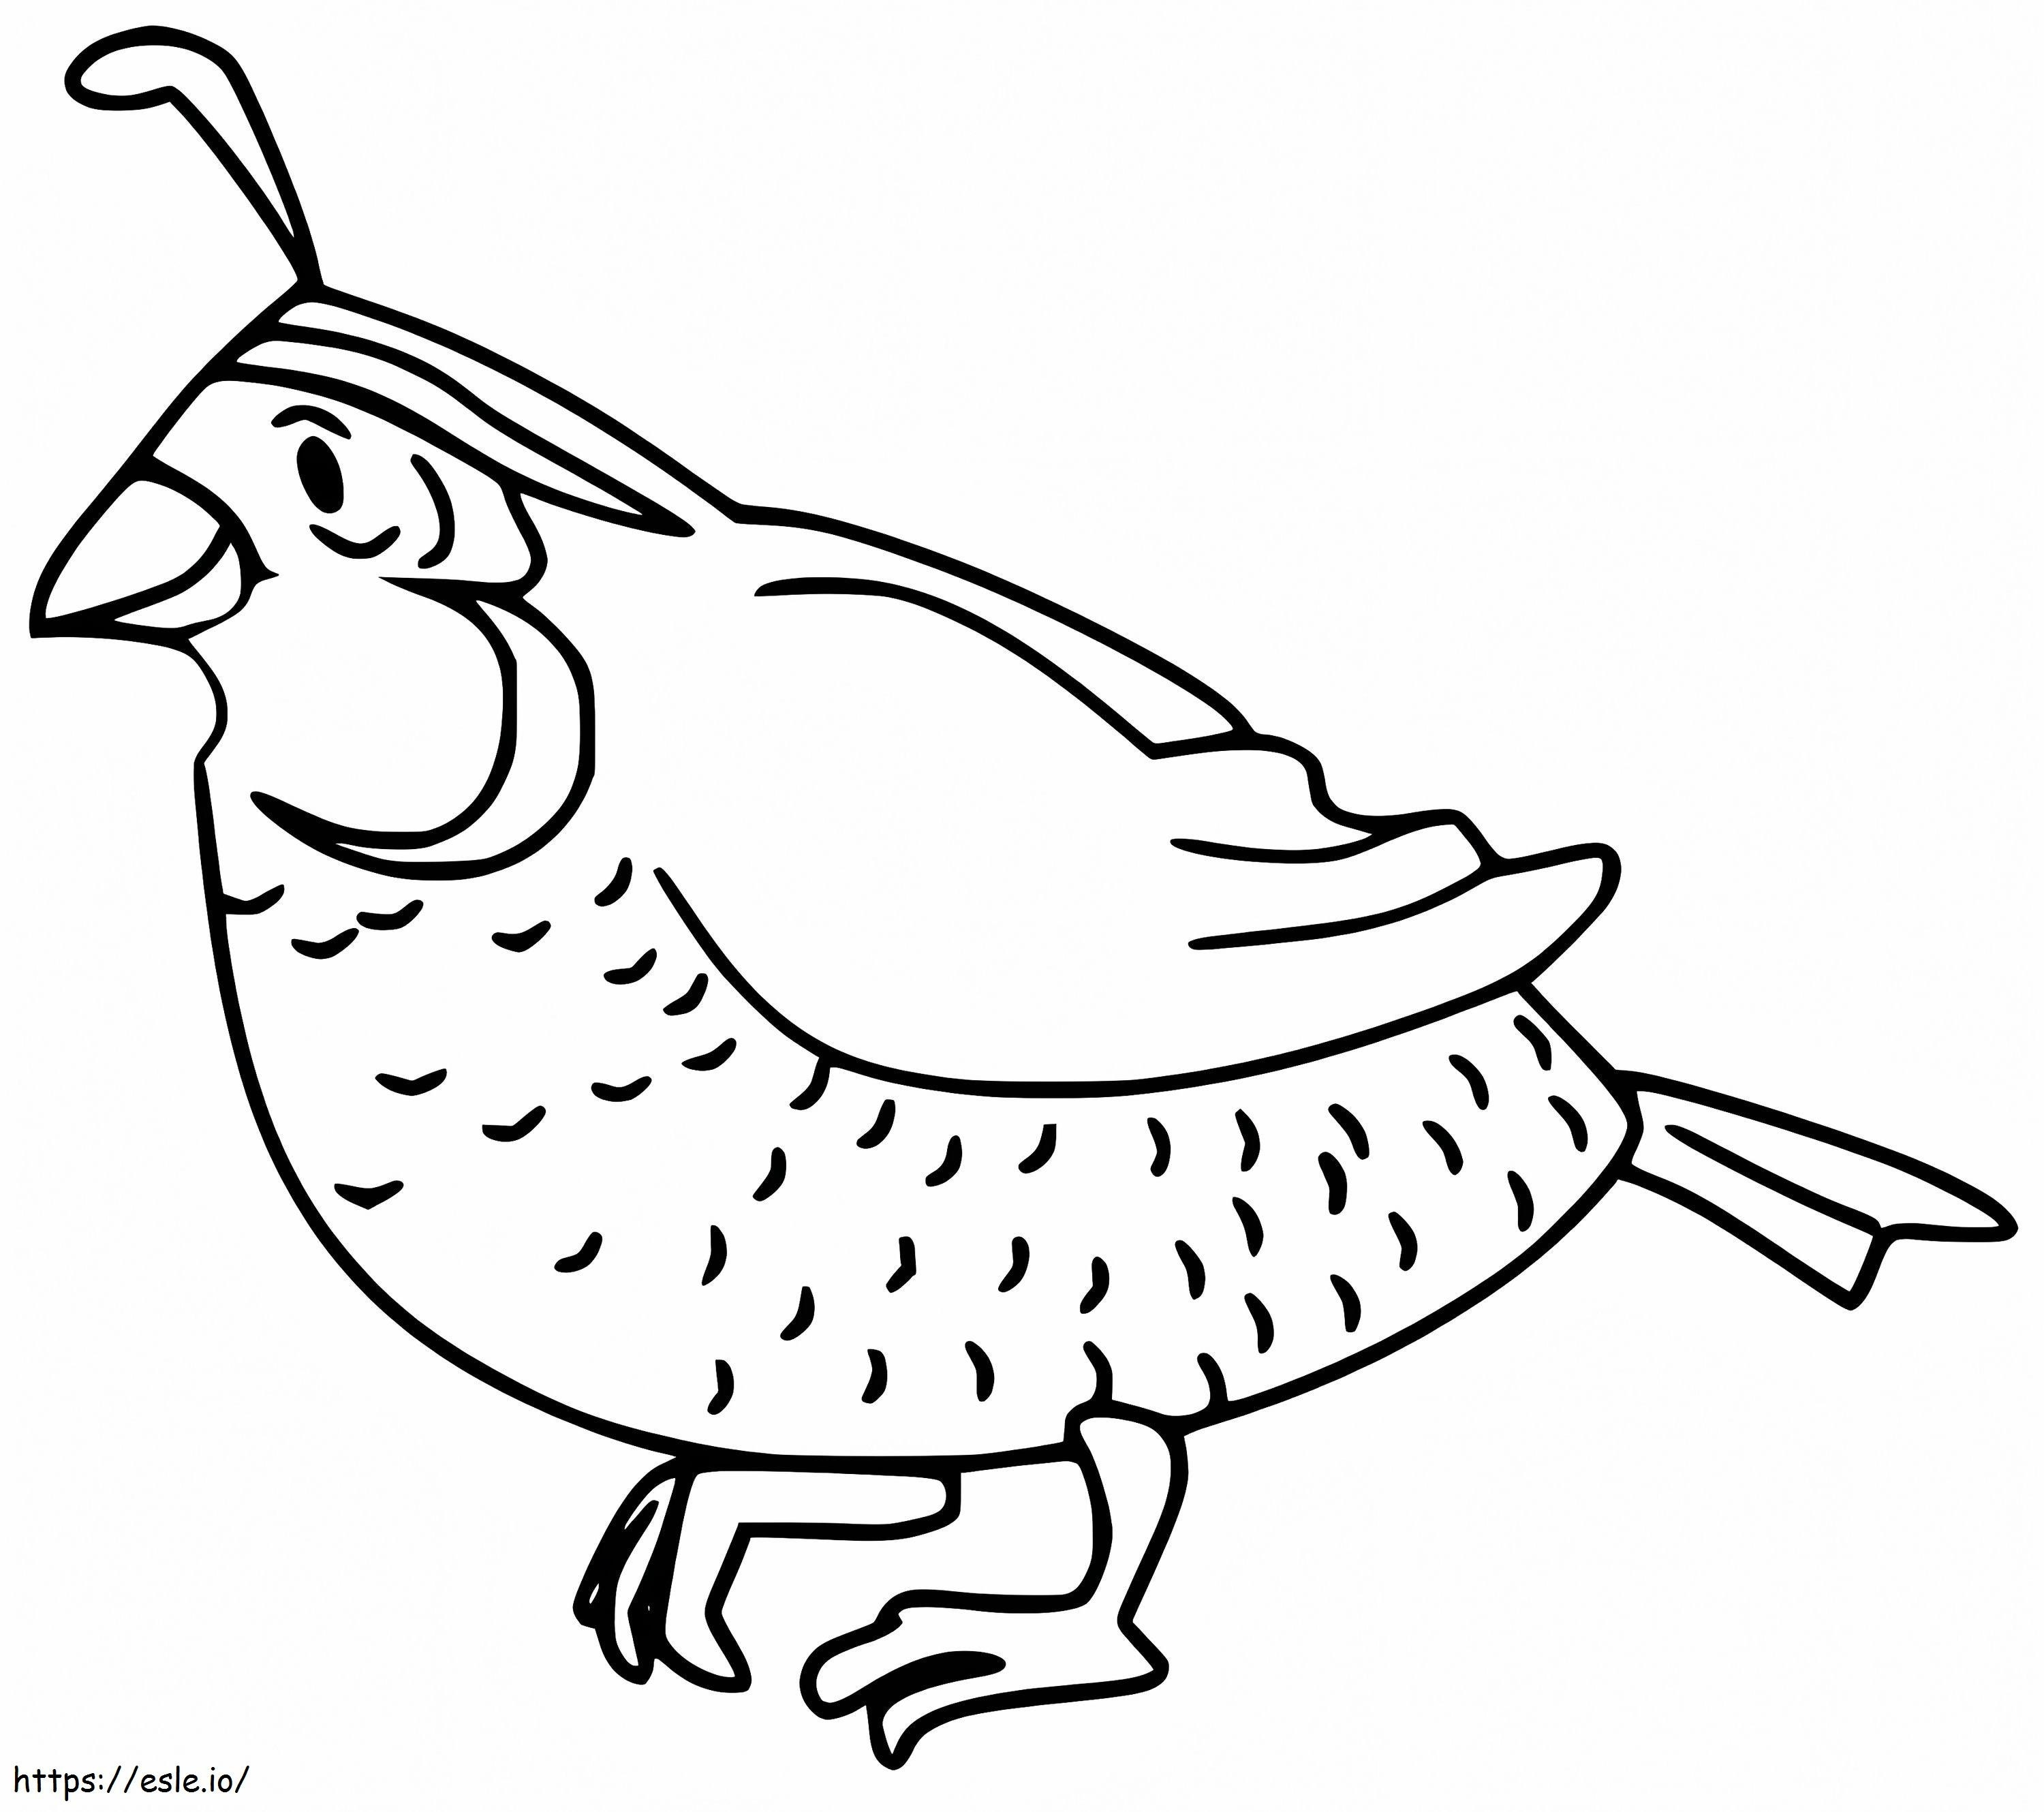 Quail 1 coloring page